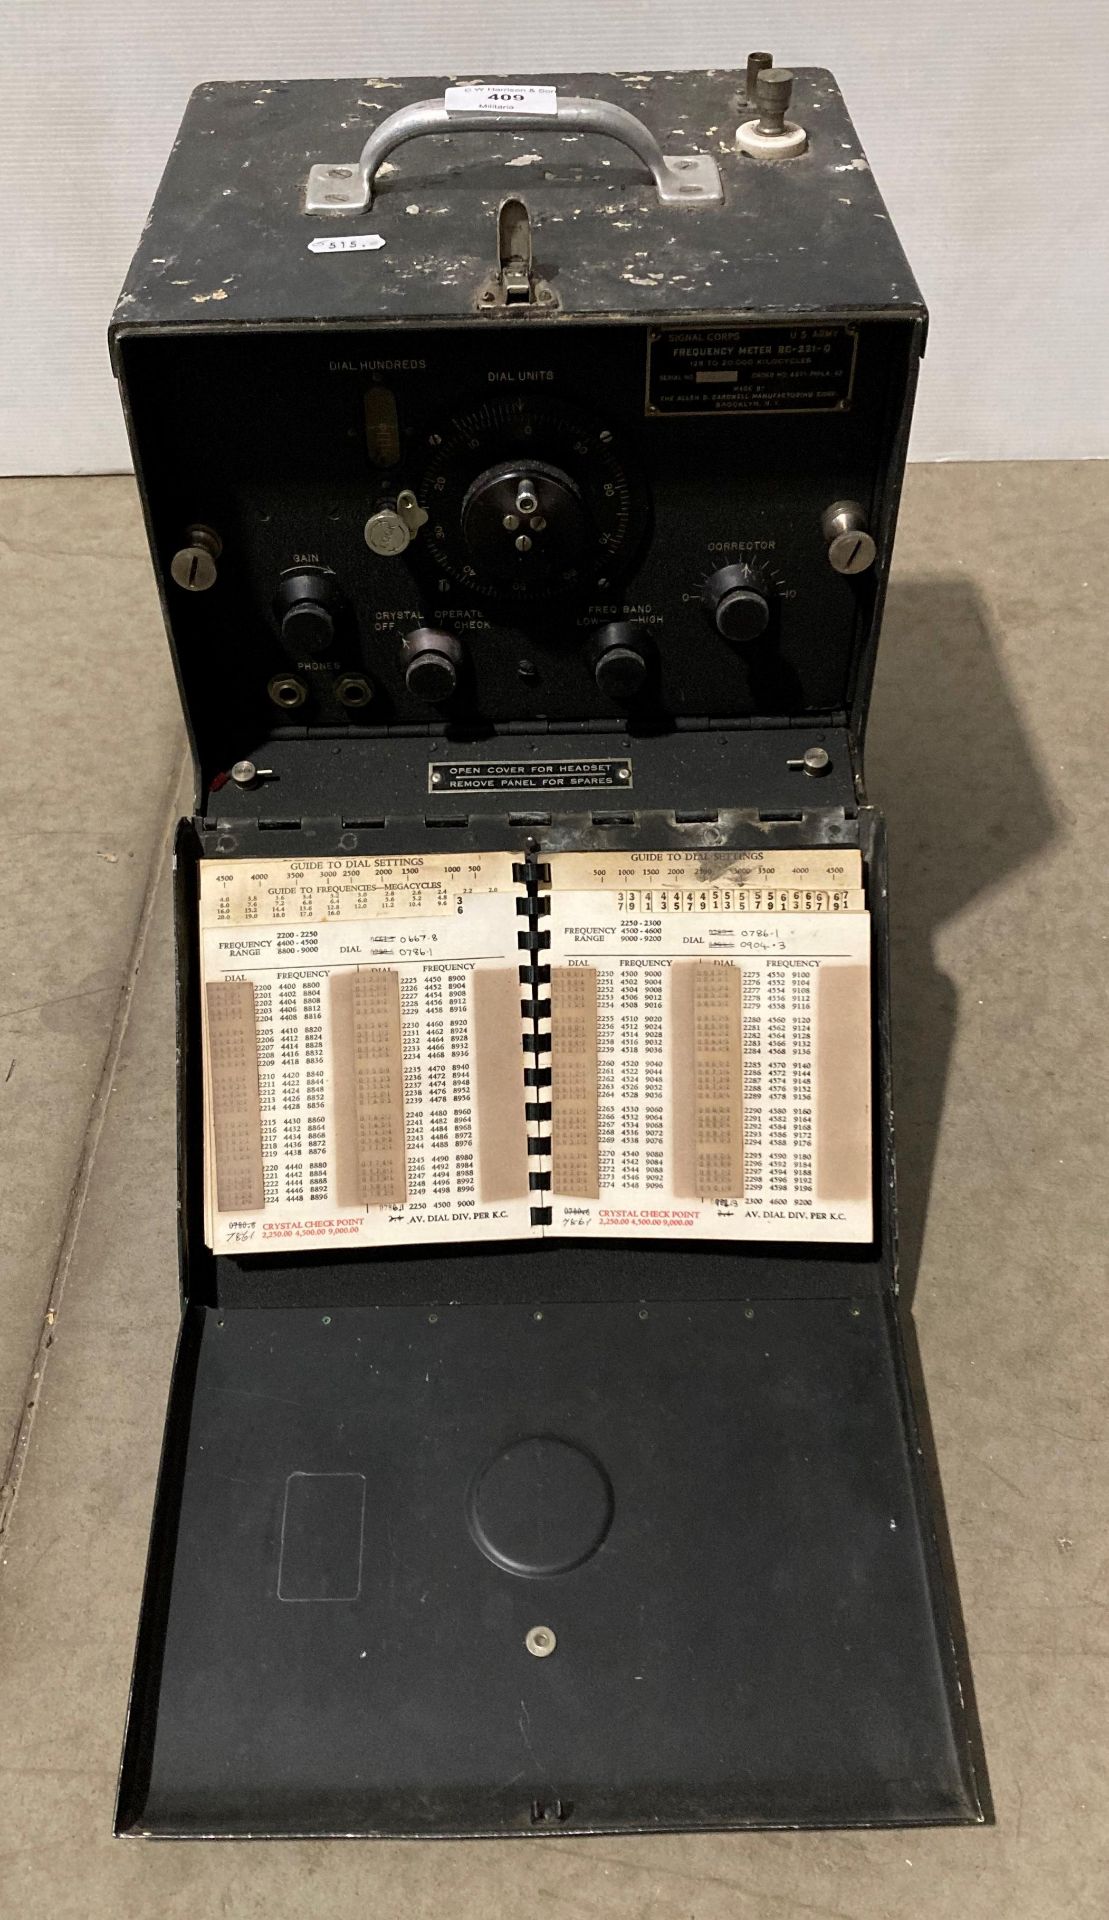 US Army Signal Corps Frequency Meter ref: BC-221-Q, serial no: 3830, made by The Allen D.